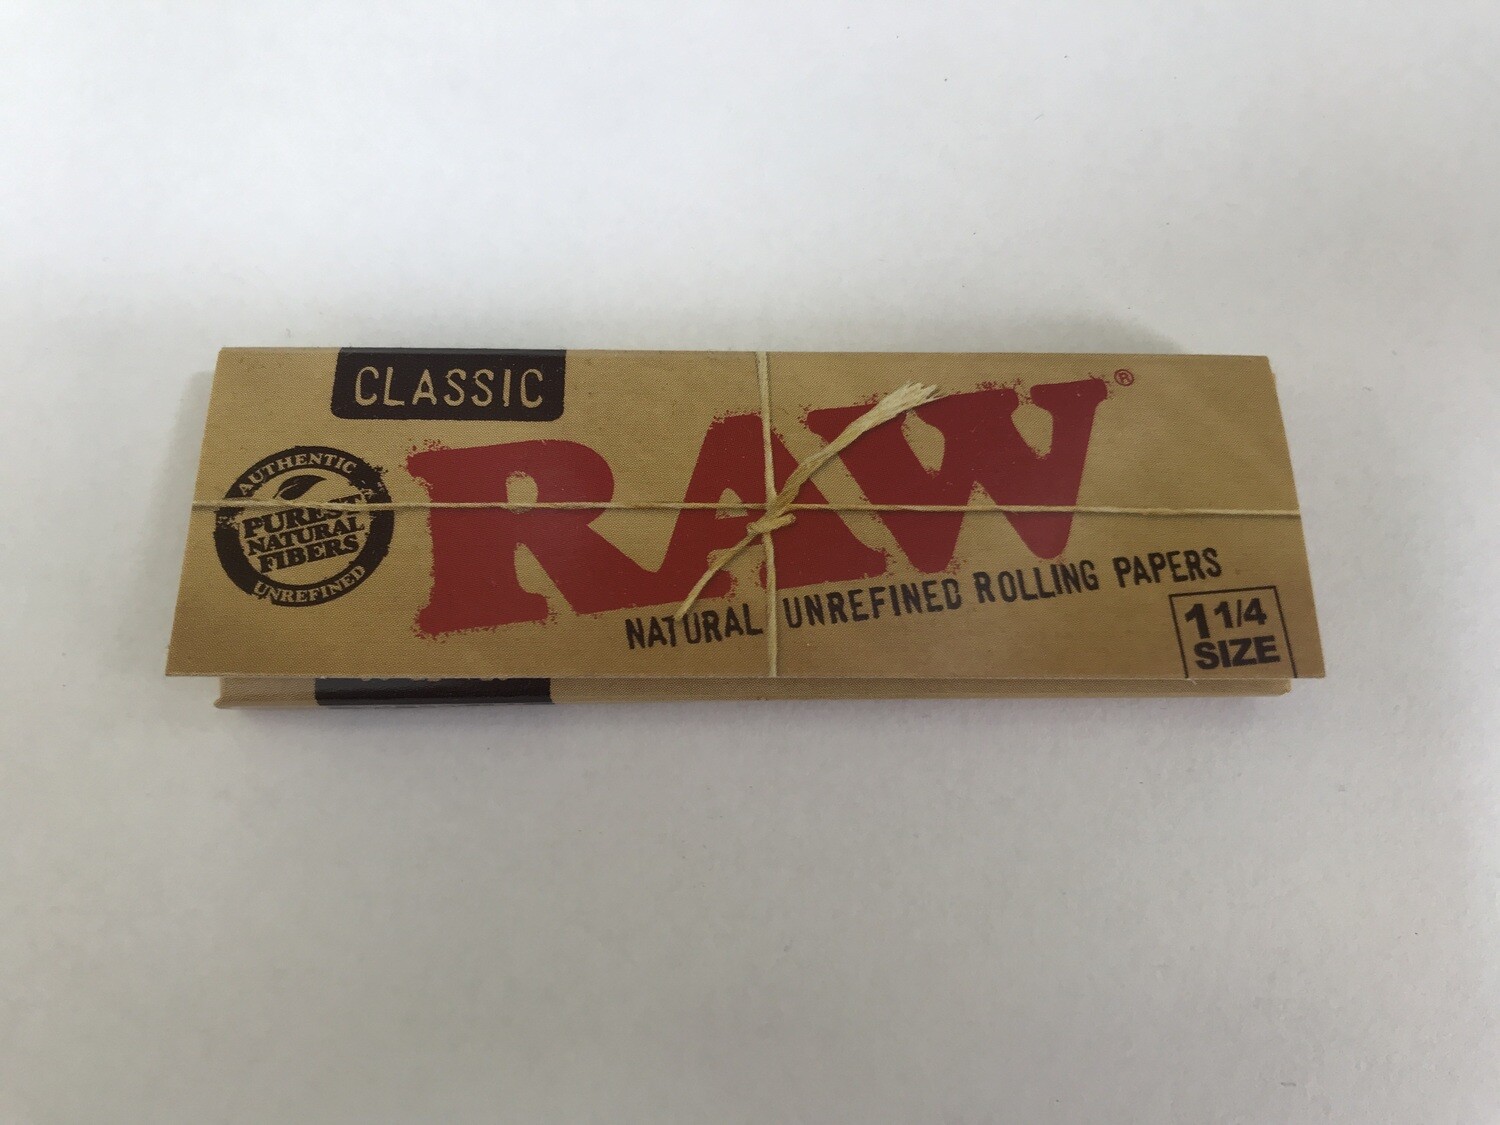 Tobacco / Accessories / Raw Rolling Papers, 1 1/4